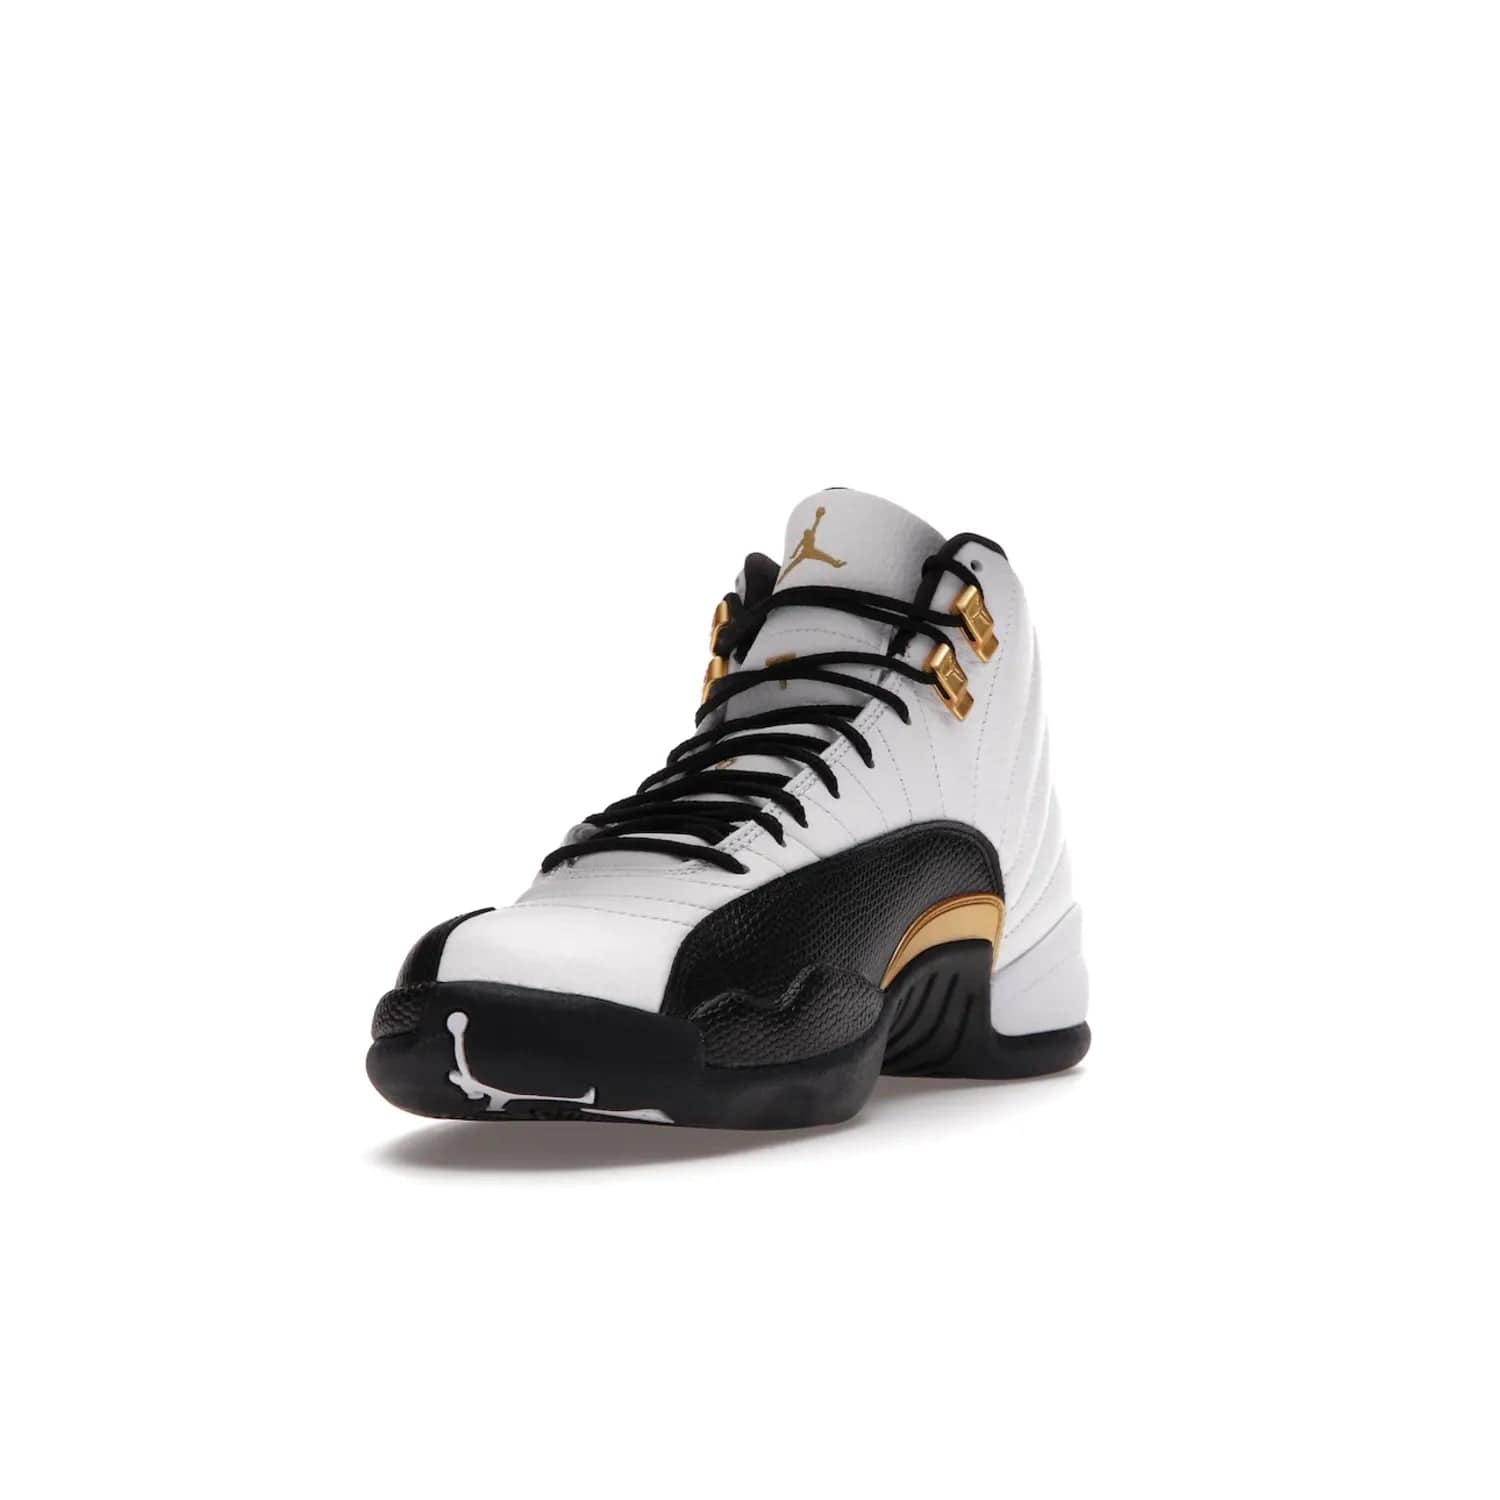 Jordan 12 Retro Royalty Taxi - Image 13 - Only at www.BallersClubKickz.com - Make a statement with the Air Jordan 12 Retro Royalty Taxi. Woven heel tag, gold plaquet, white tumbled leather upper plus a black toe wrap, make this modern take on the classic a must-have. Available in November 2021.